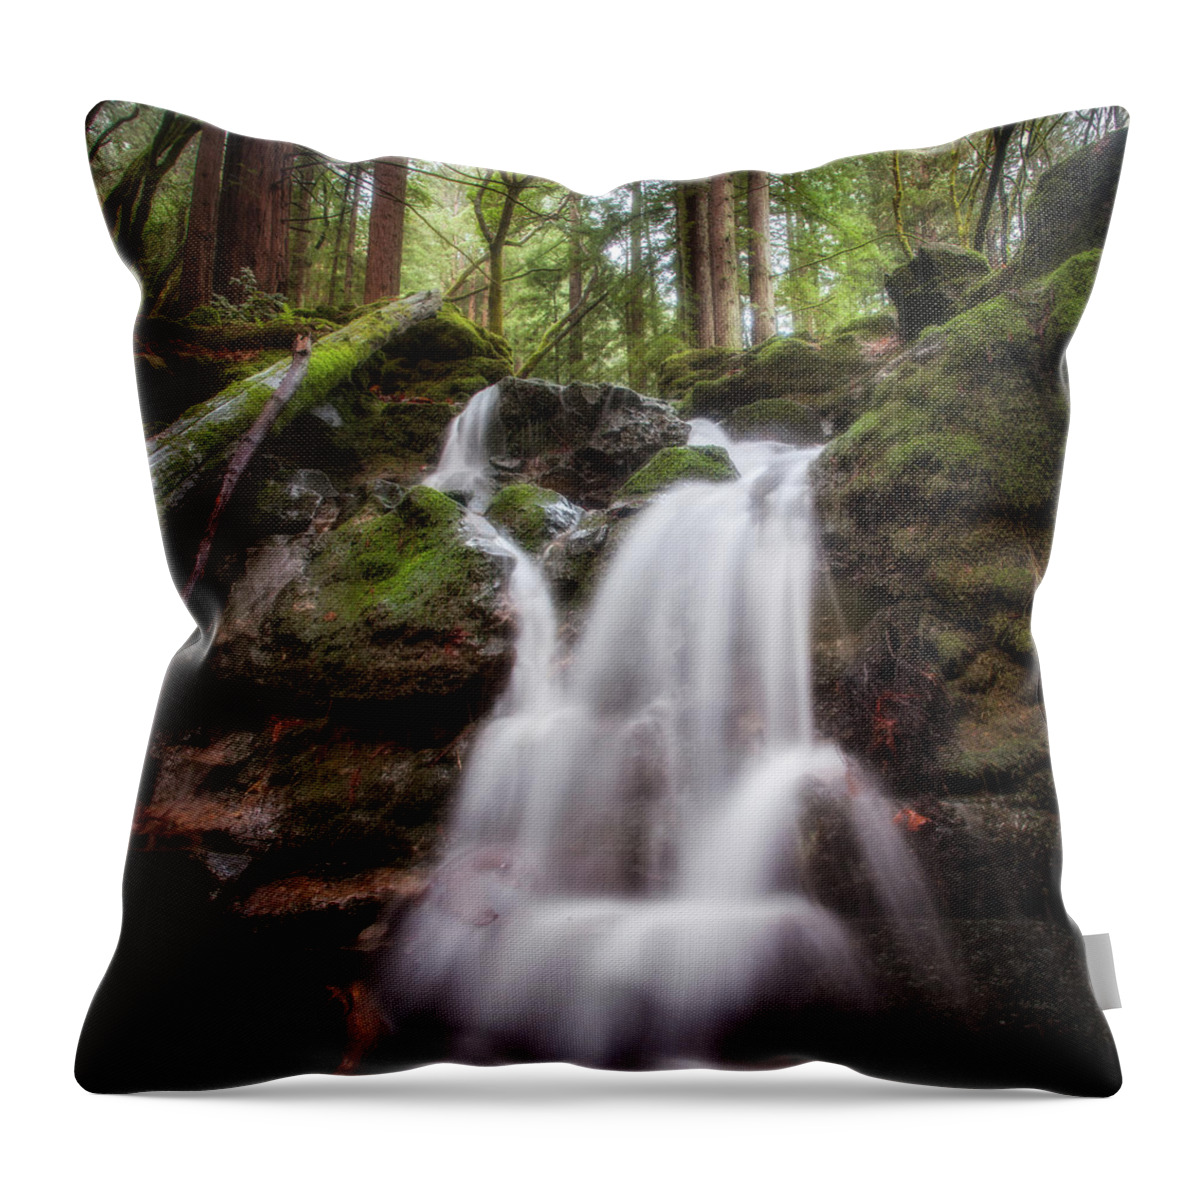 Waterfall Throw Pillow featuring the photograph Waterfall, Baltimore Canyon by Donald Kinney